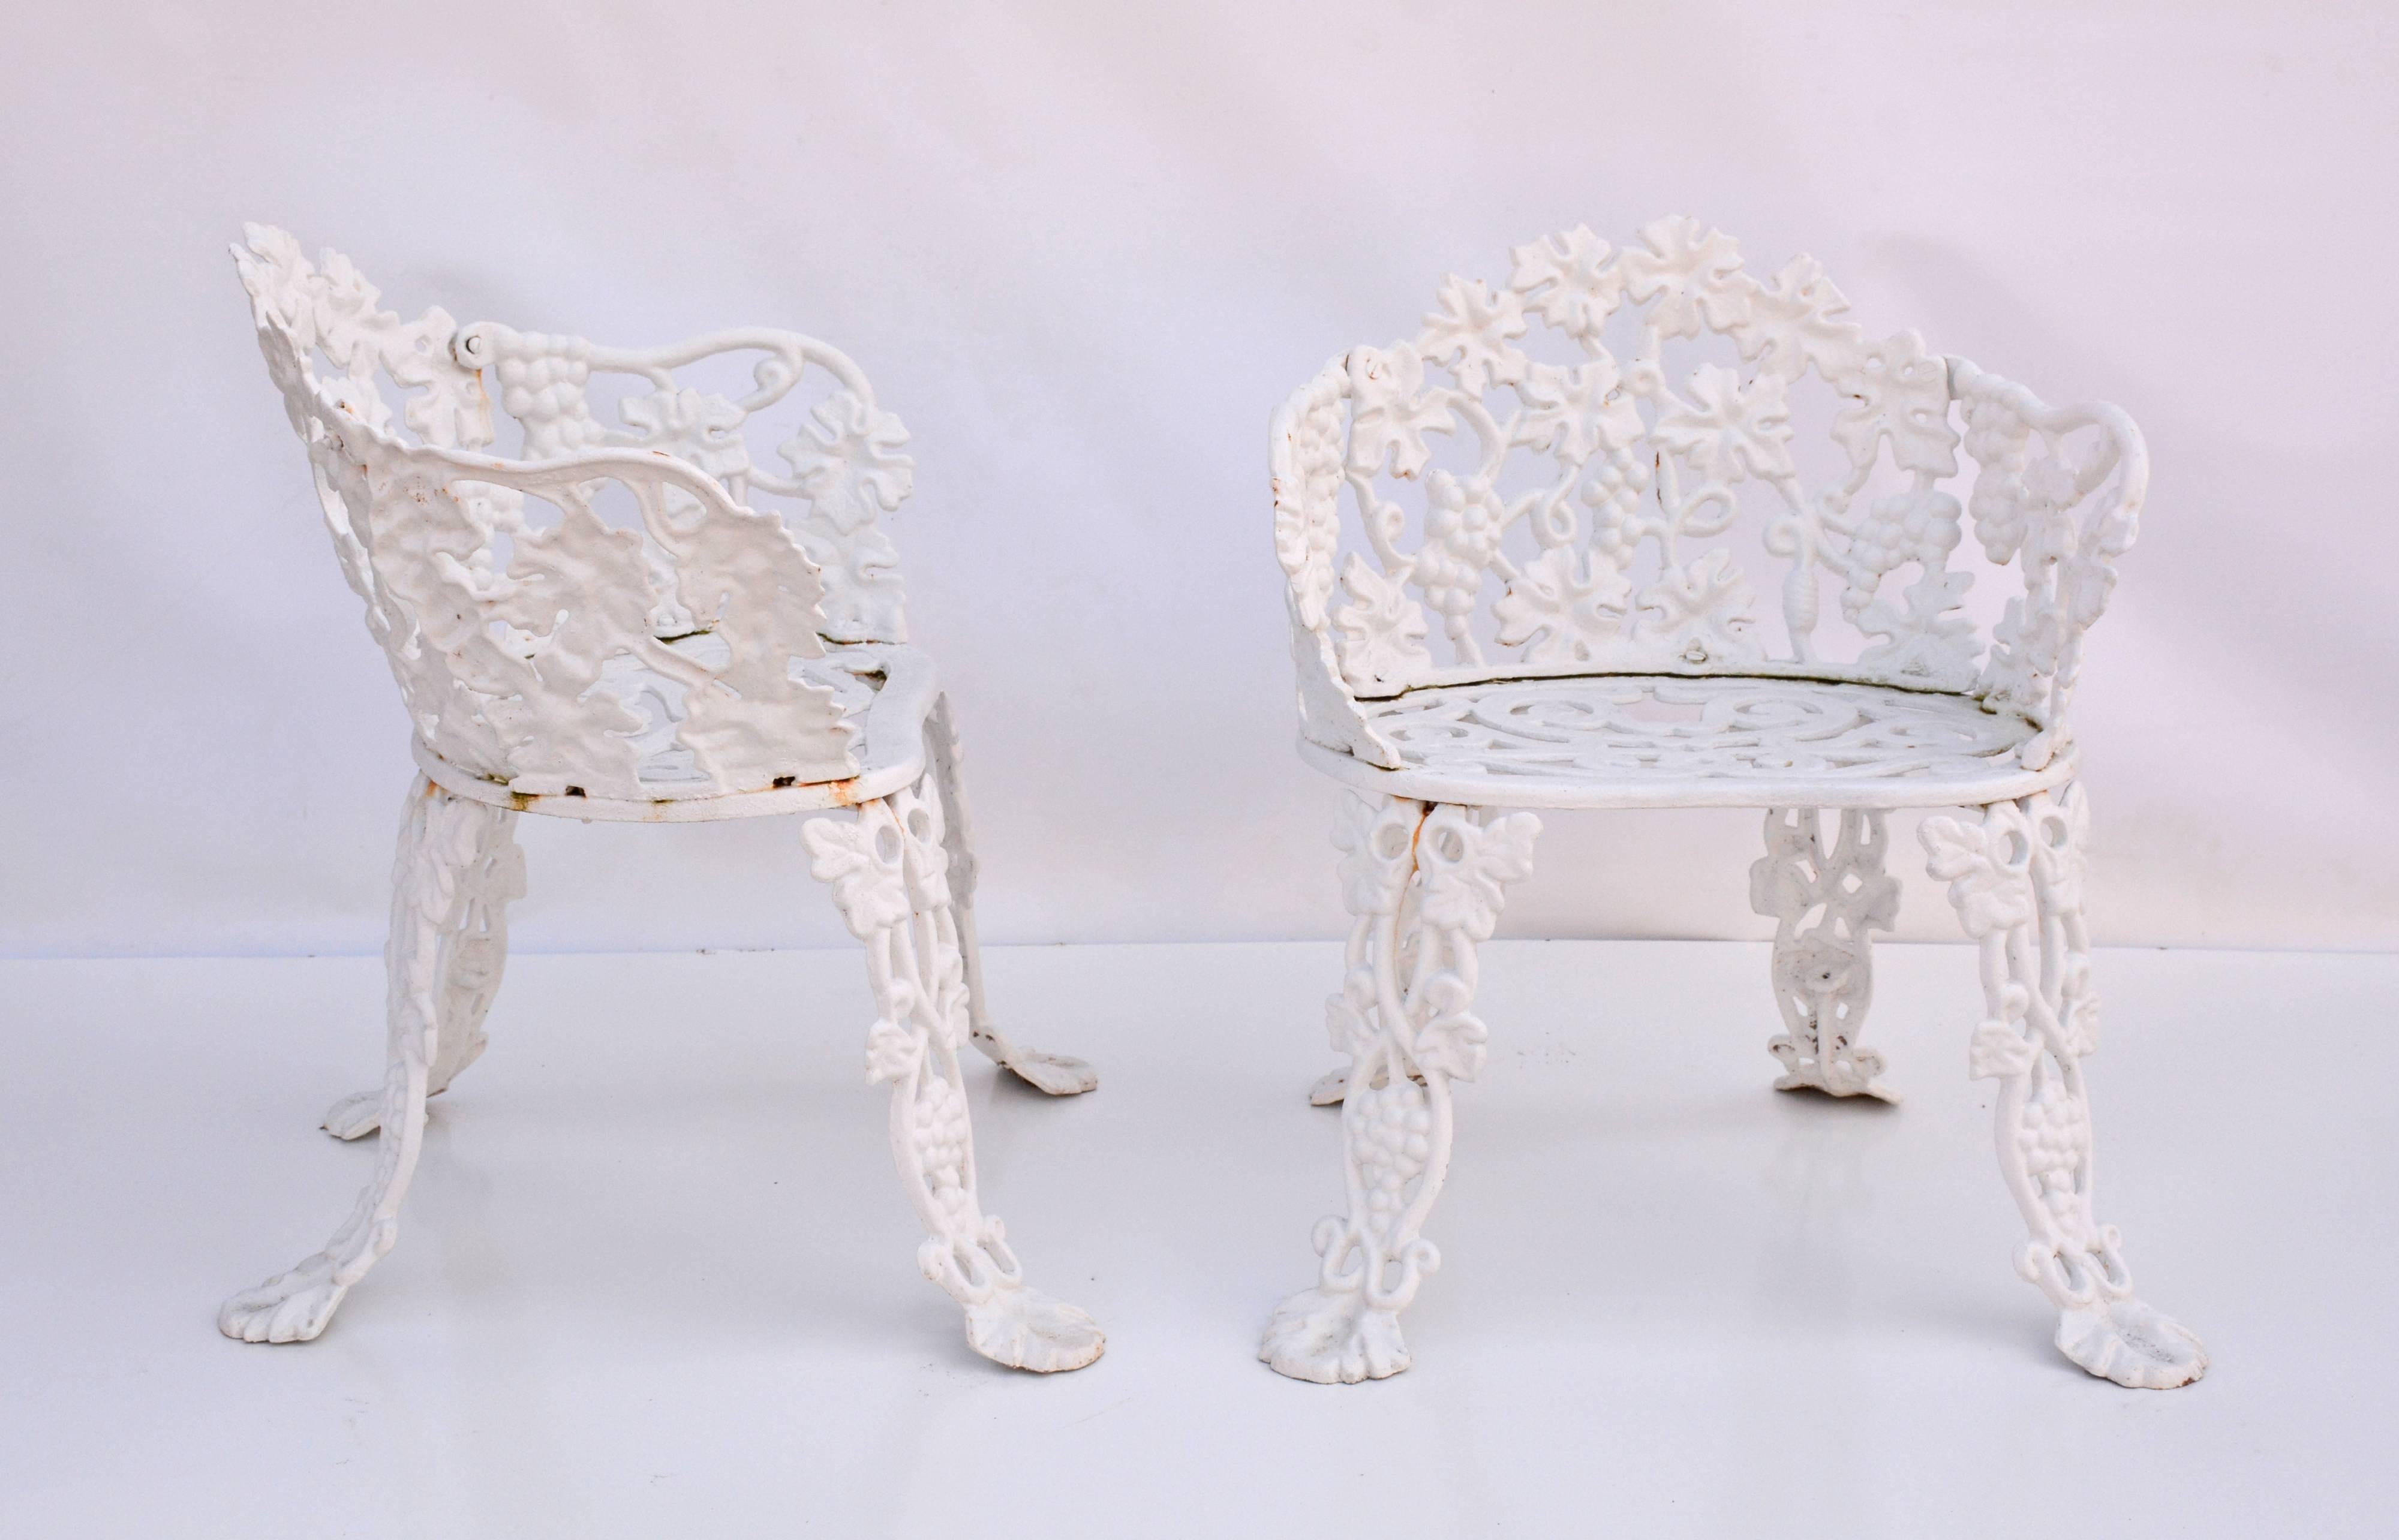 The chairs, painted white, are embellished with grapes, leaves and vines.

Arms: 22.50" H.